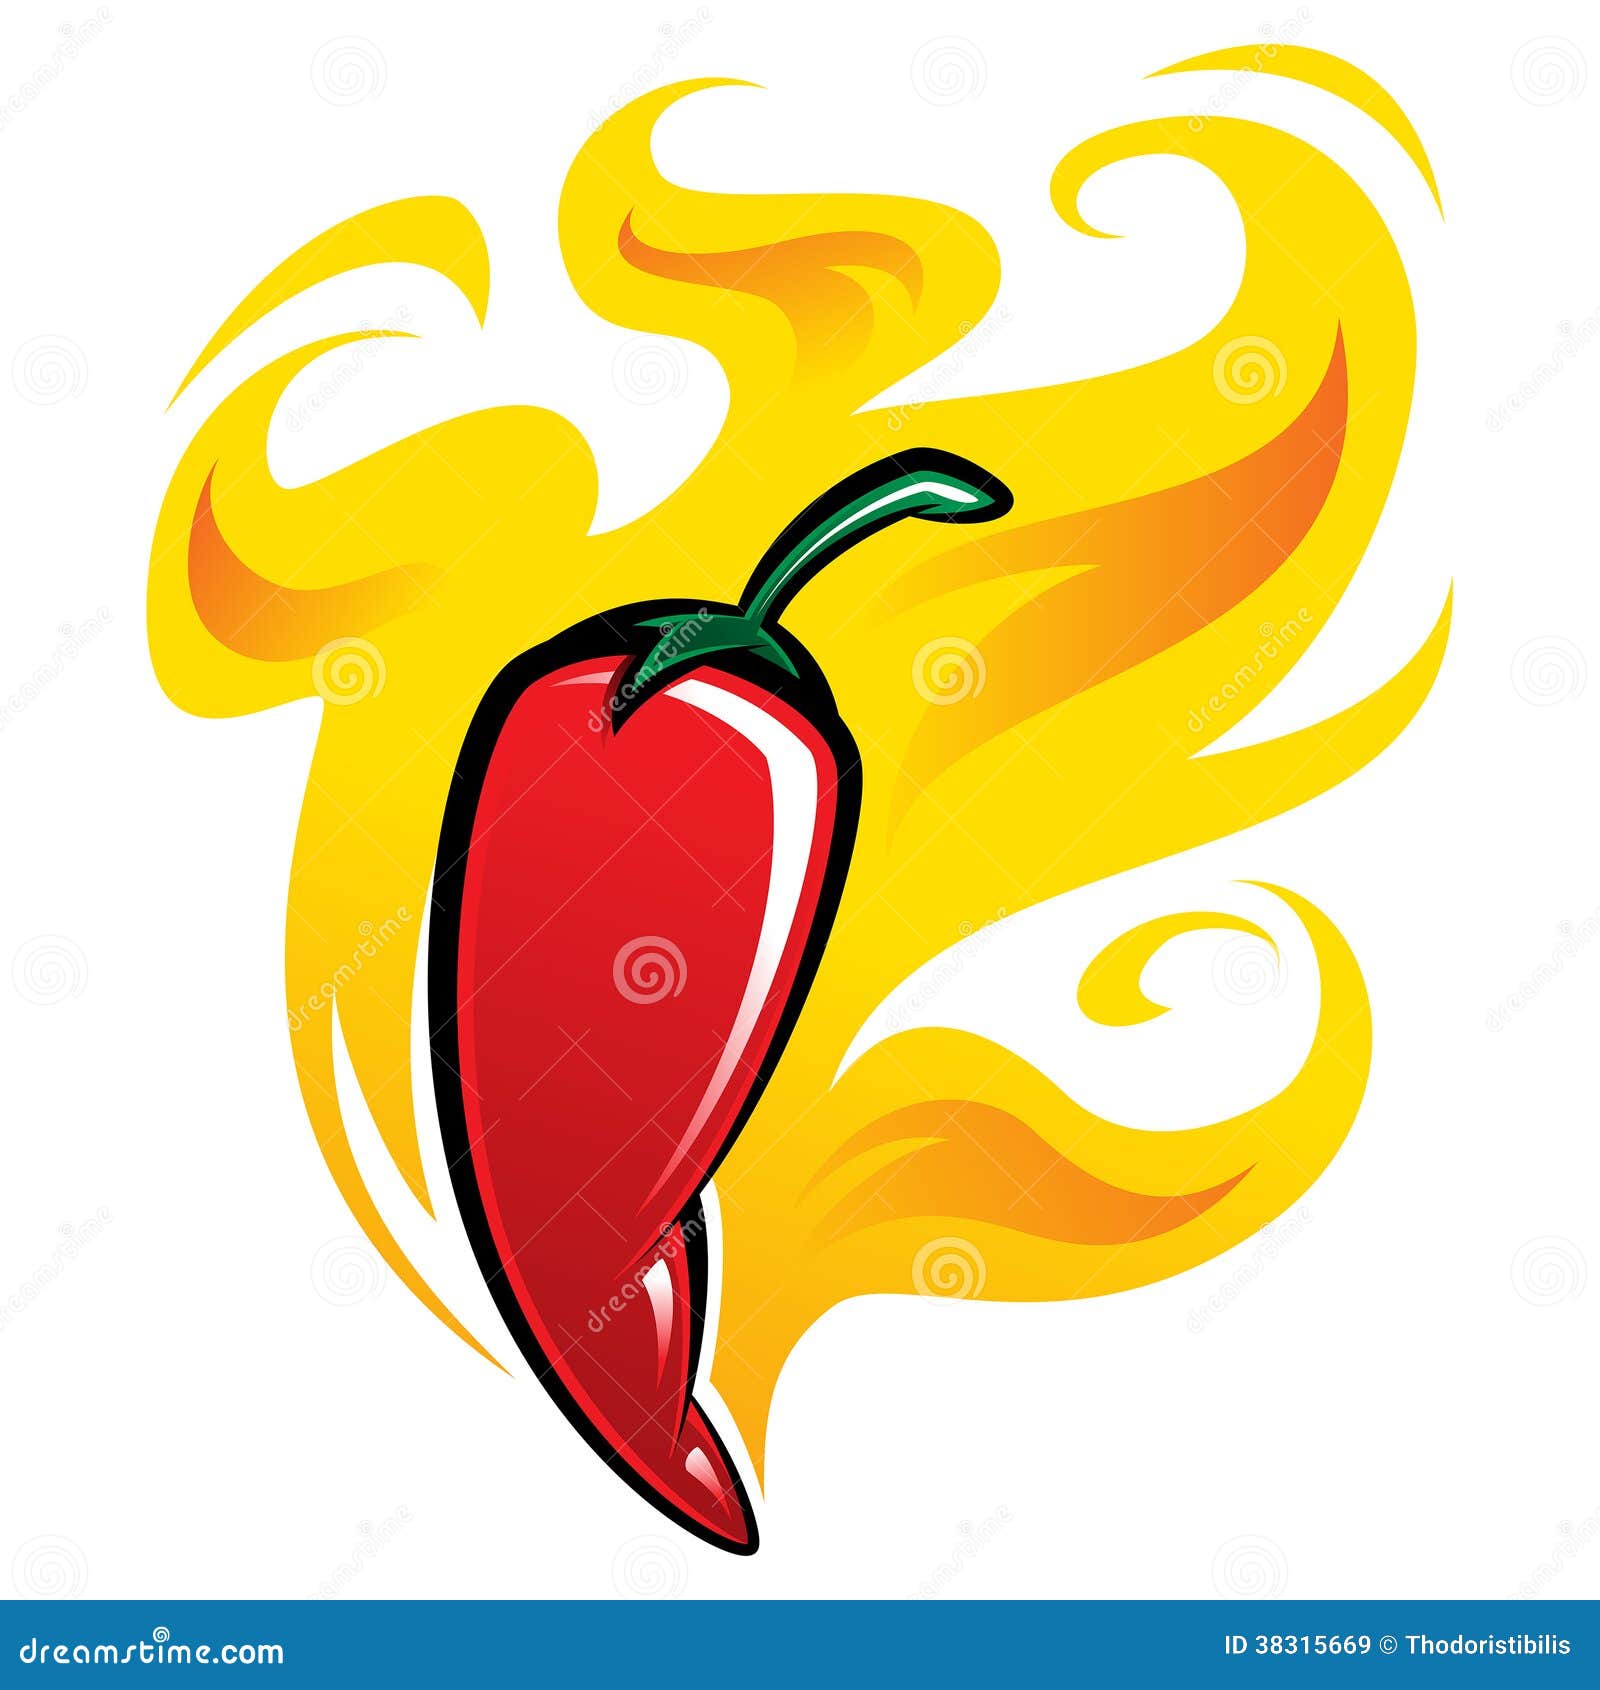 extremely hot red chili pepper on fire